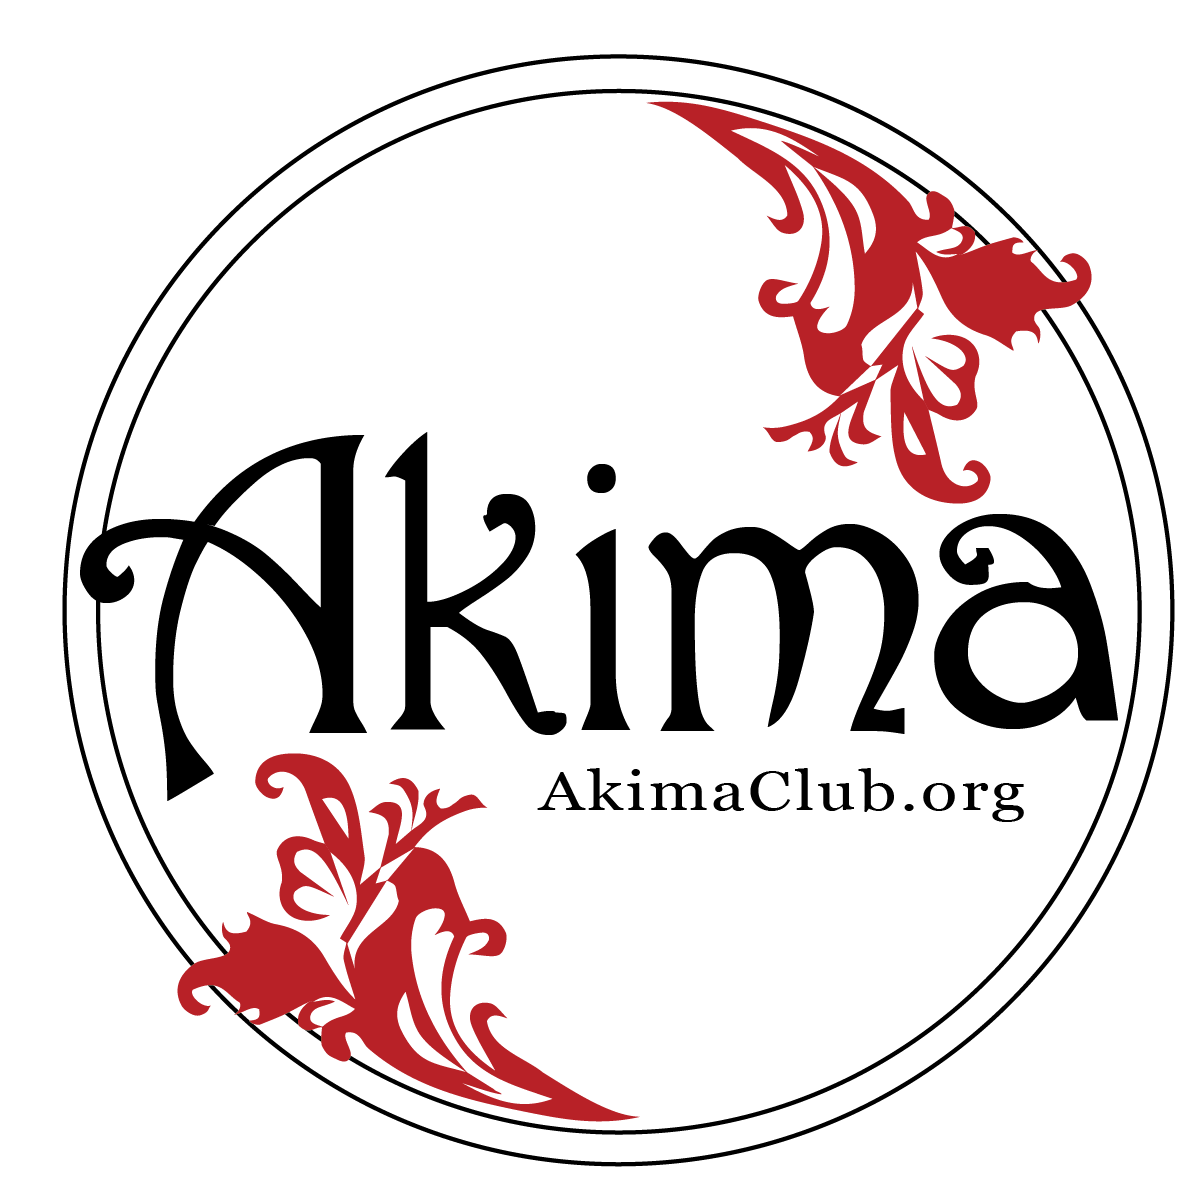 Akima Club of Knoxville